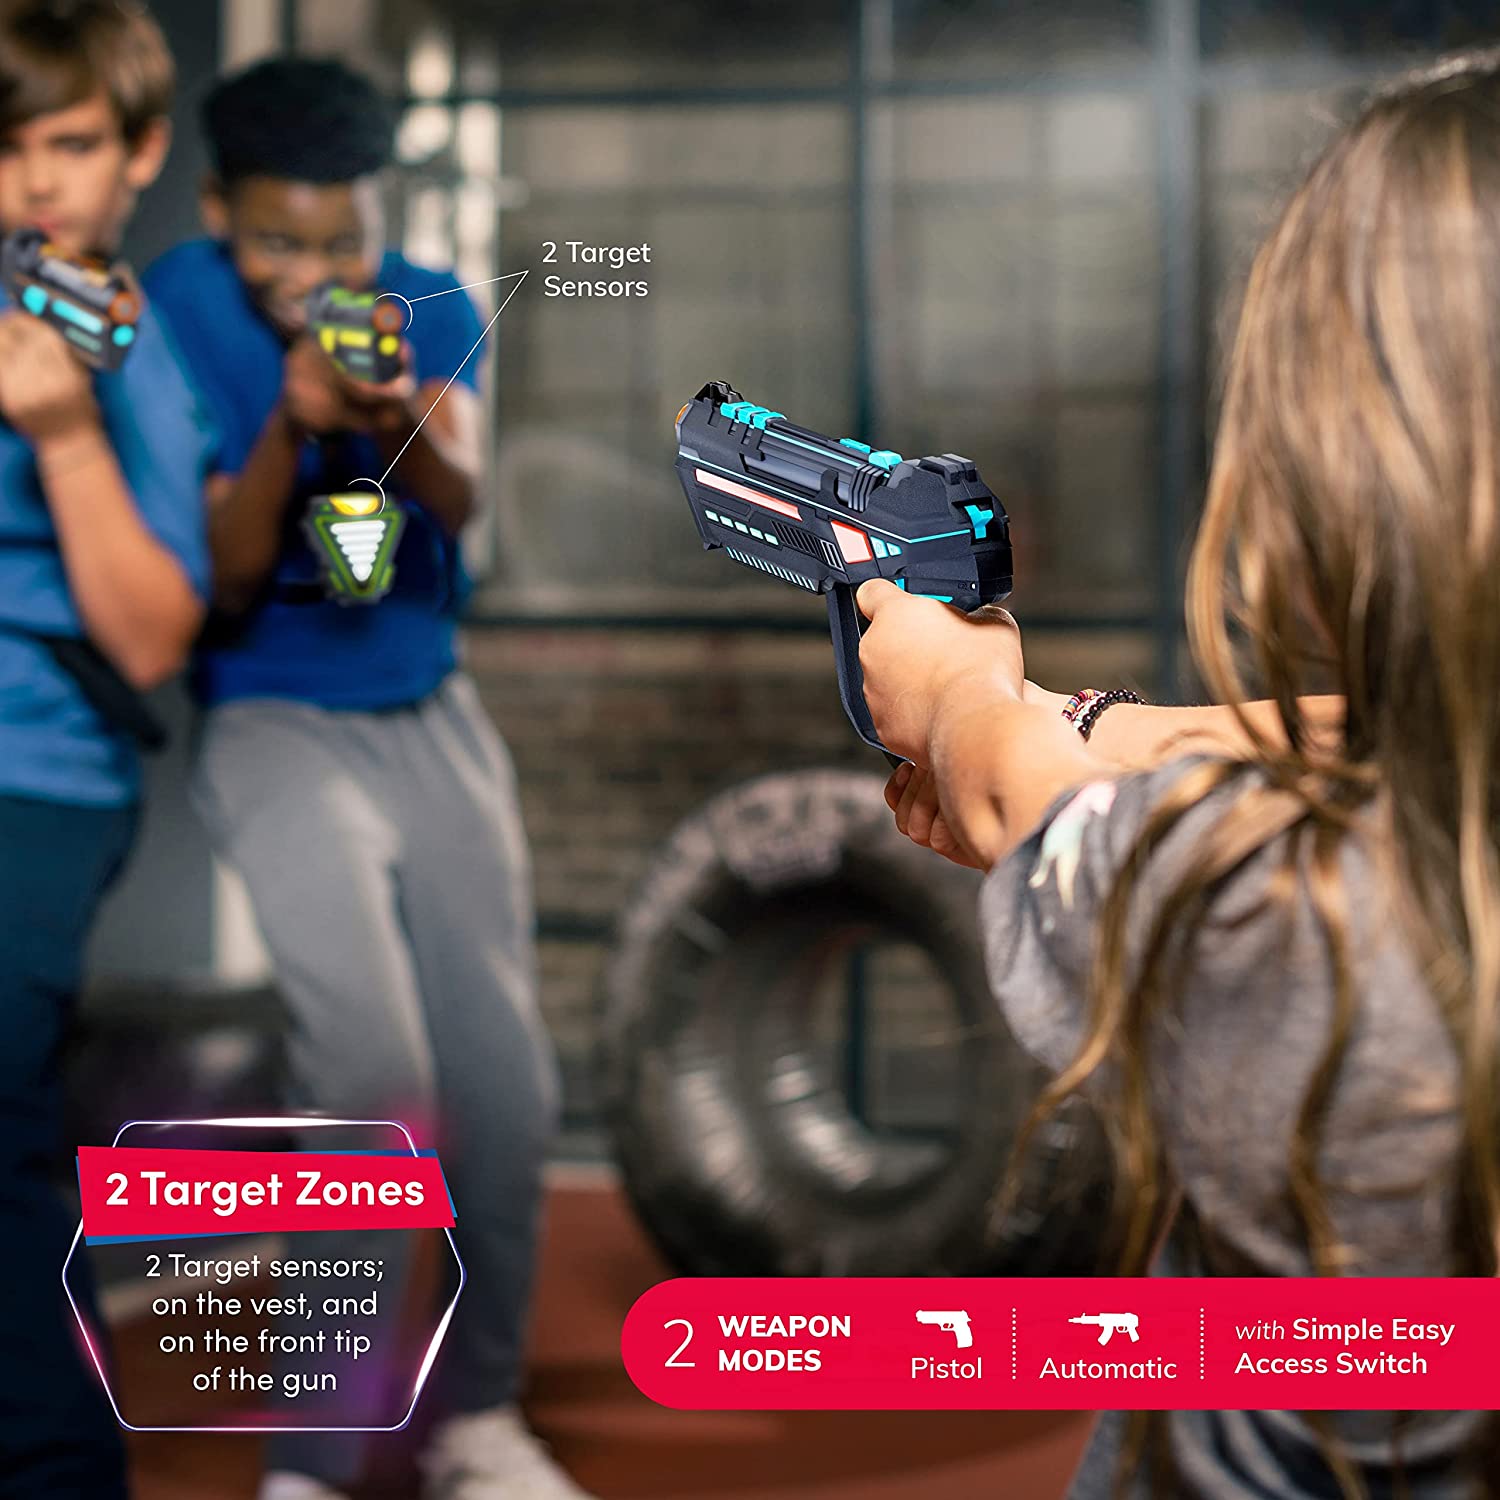 Cool　Games　Gun　Year　for　Rechargeable　Tag　Teens　Set　8+　for　Age　Vest　Toys　Boy　Sensors　Laser　Ideas　Adults,　Kids,　Fun　Teenage　Group　with　Teen　Old　Outdoor